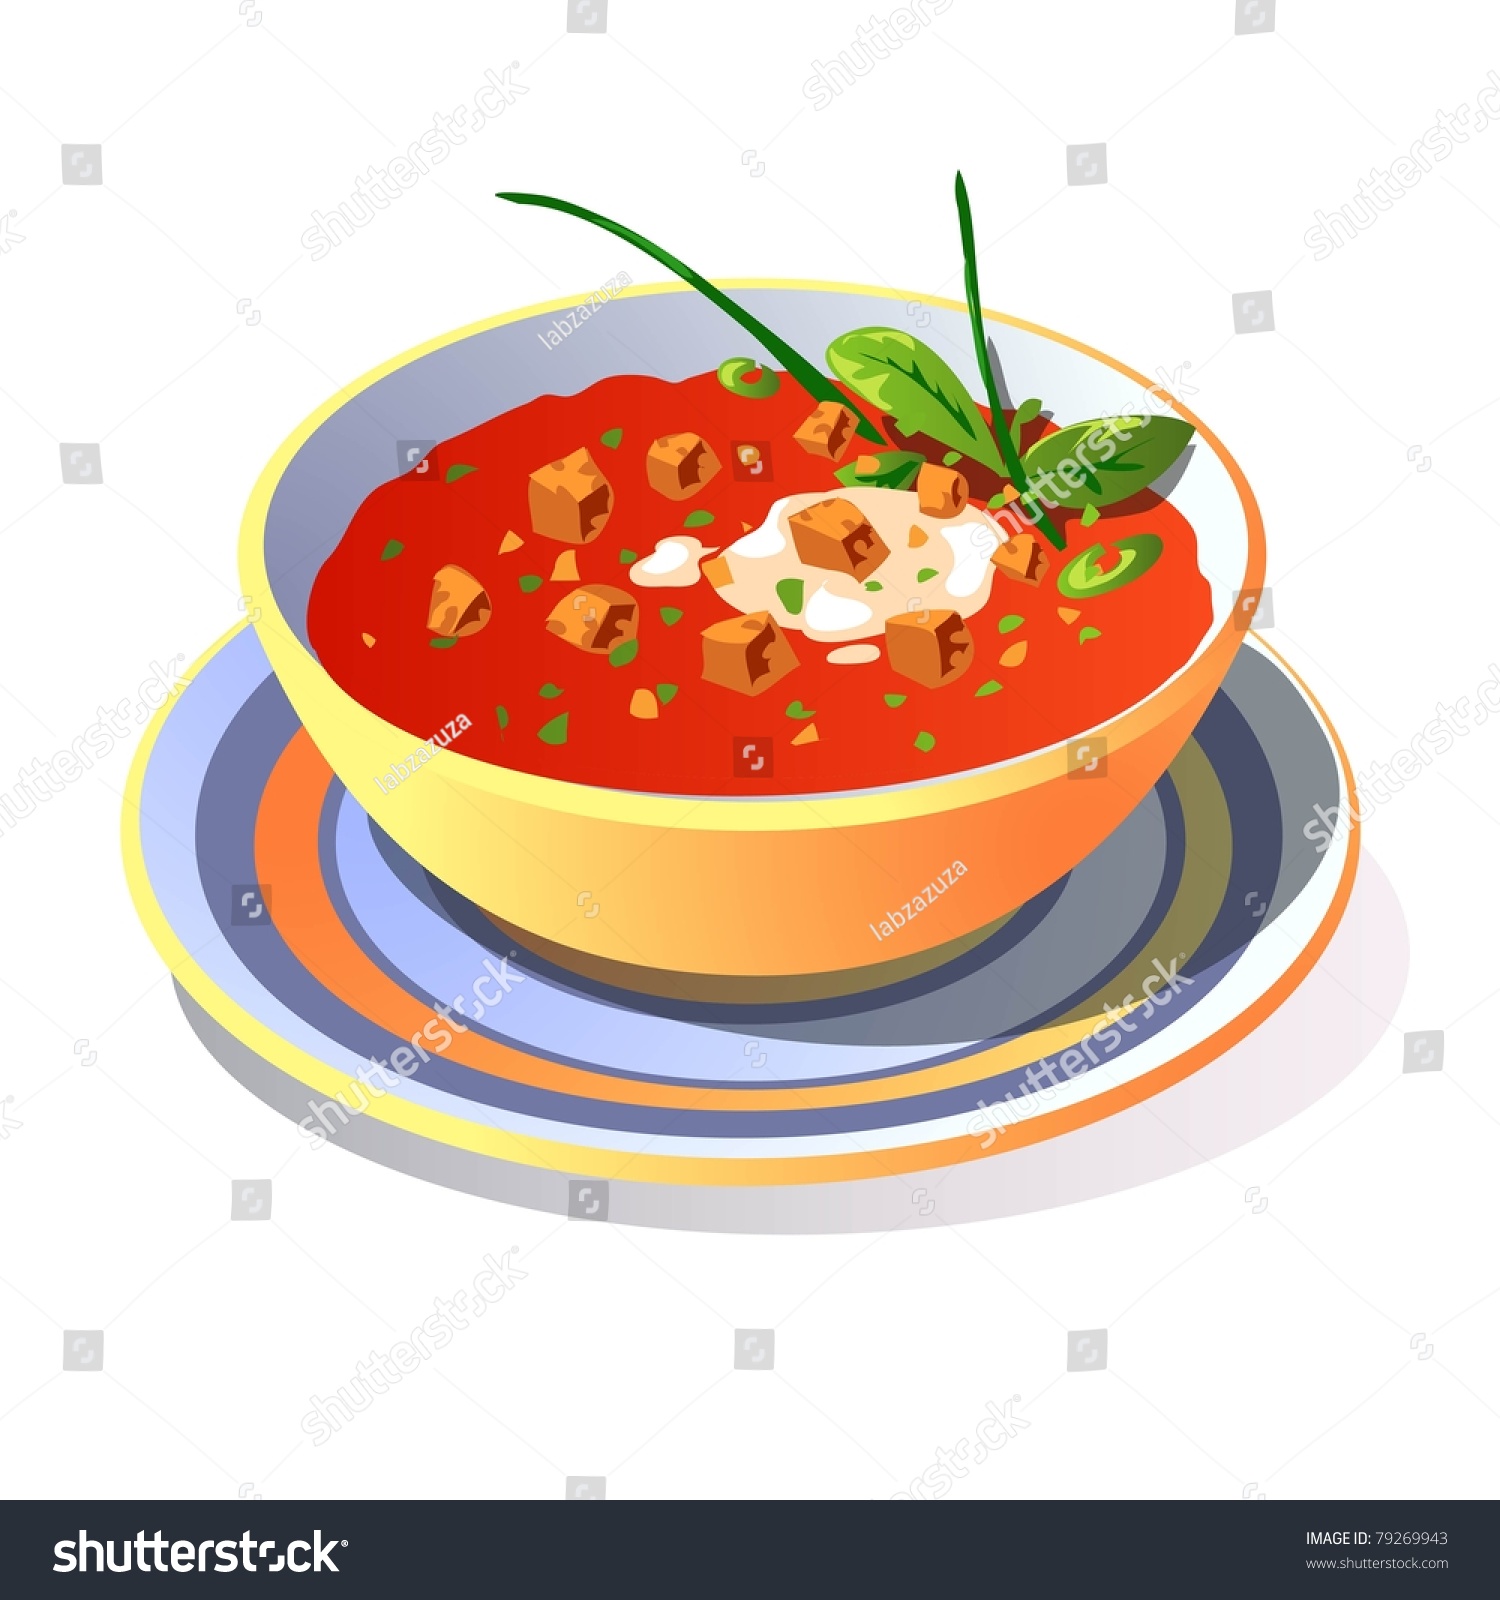 Tomato Soup Croutons Stock Vector (Royalty Free) 79269943 Shutterstock 